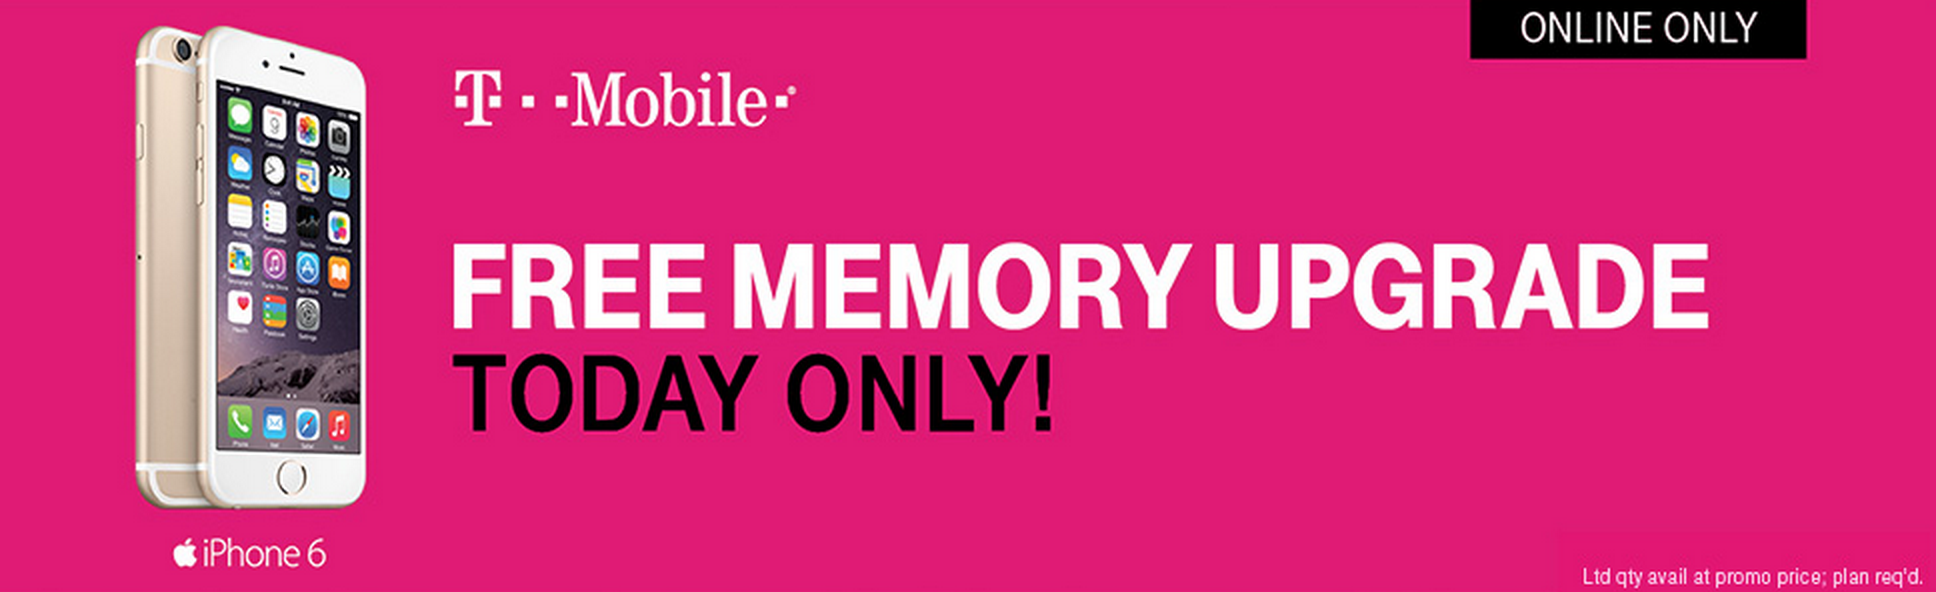 TMobile cuts iPhone pricing for Cyber Monday, 64GB iPhone 6 100 off, 5s & 5c discounts 9to5Mac